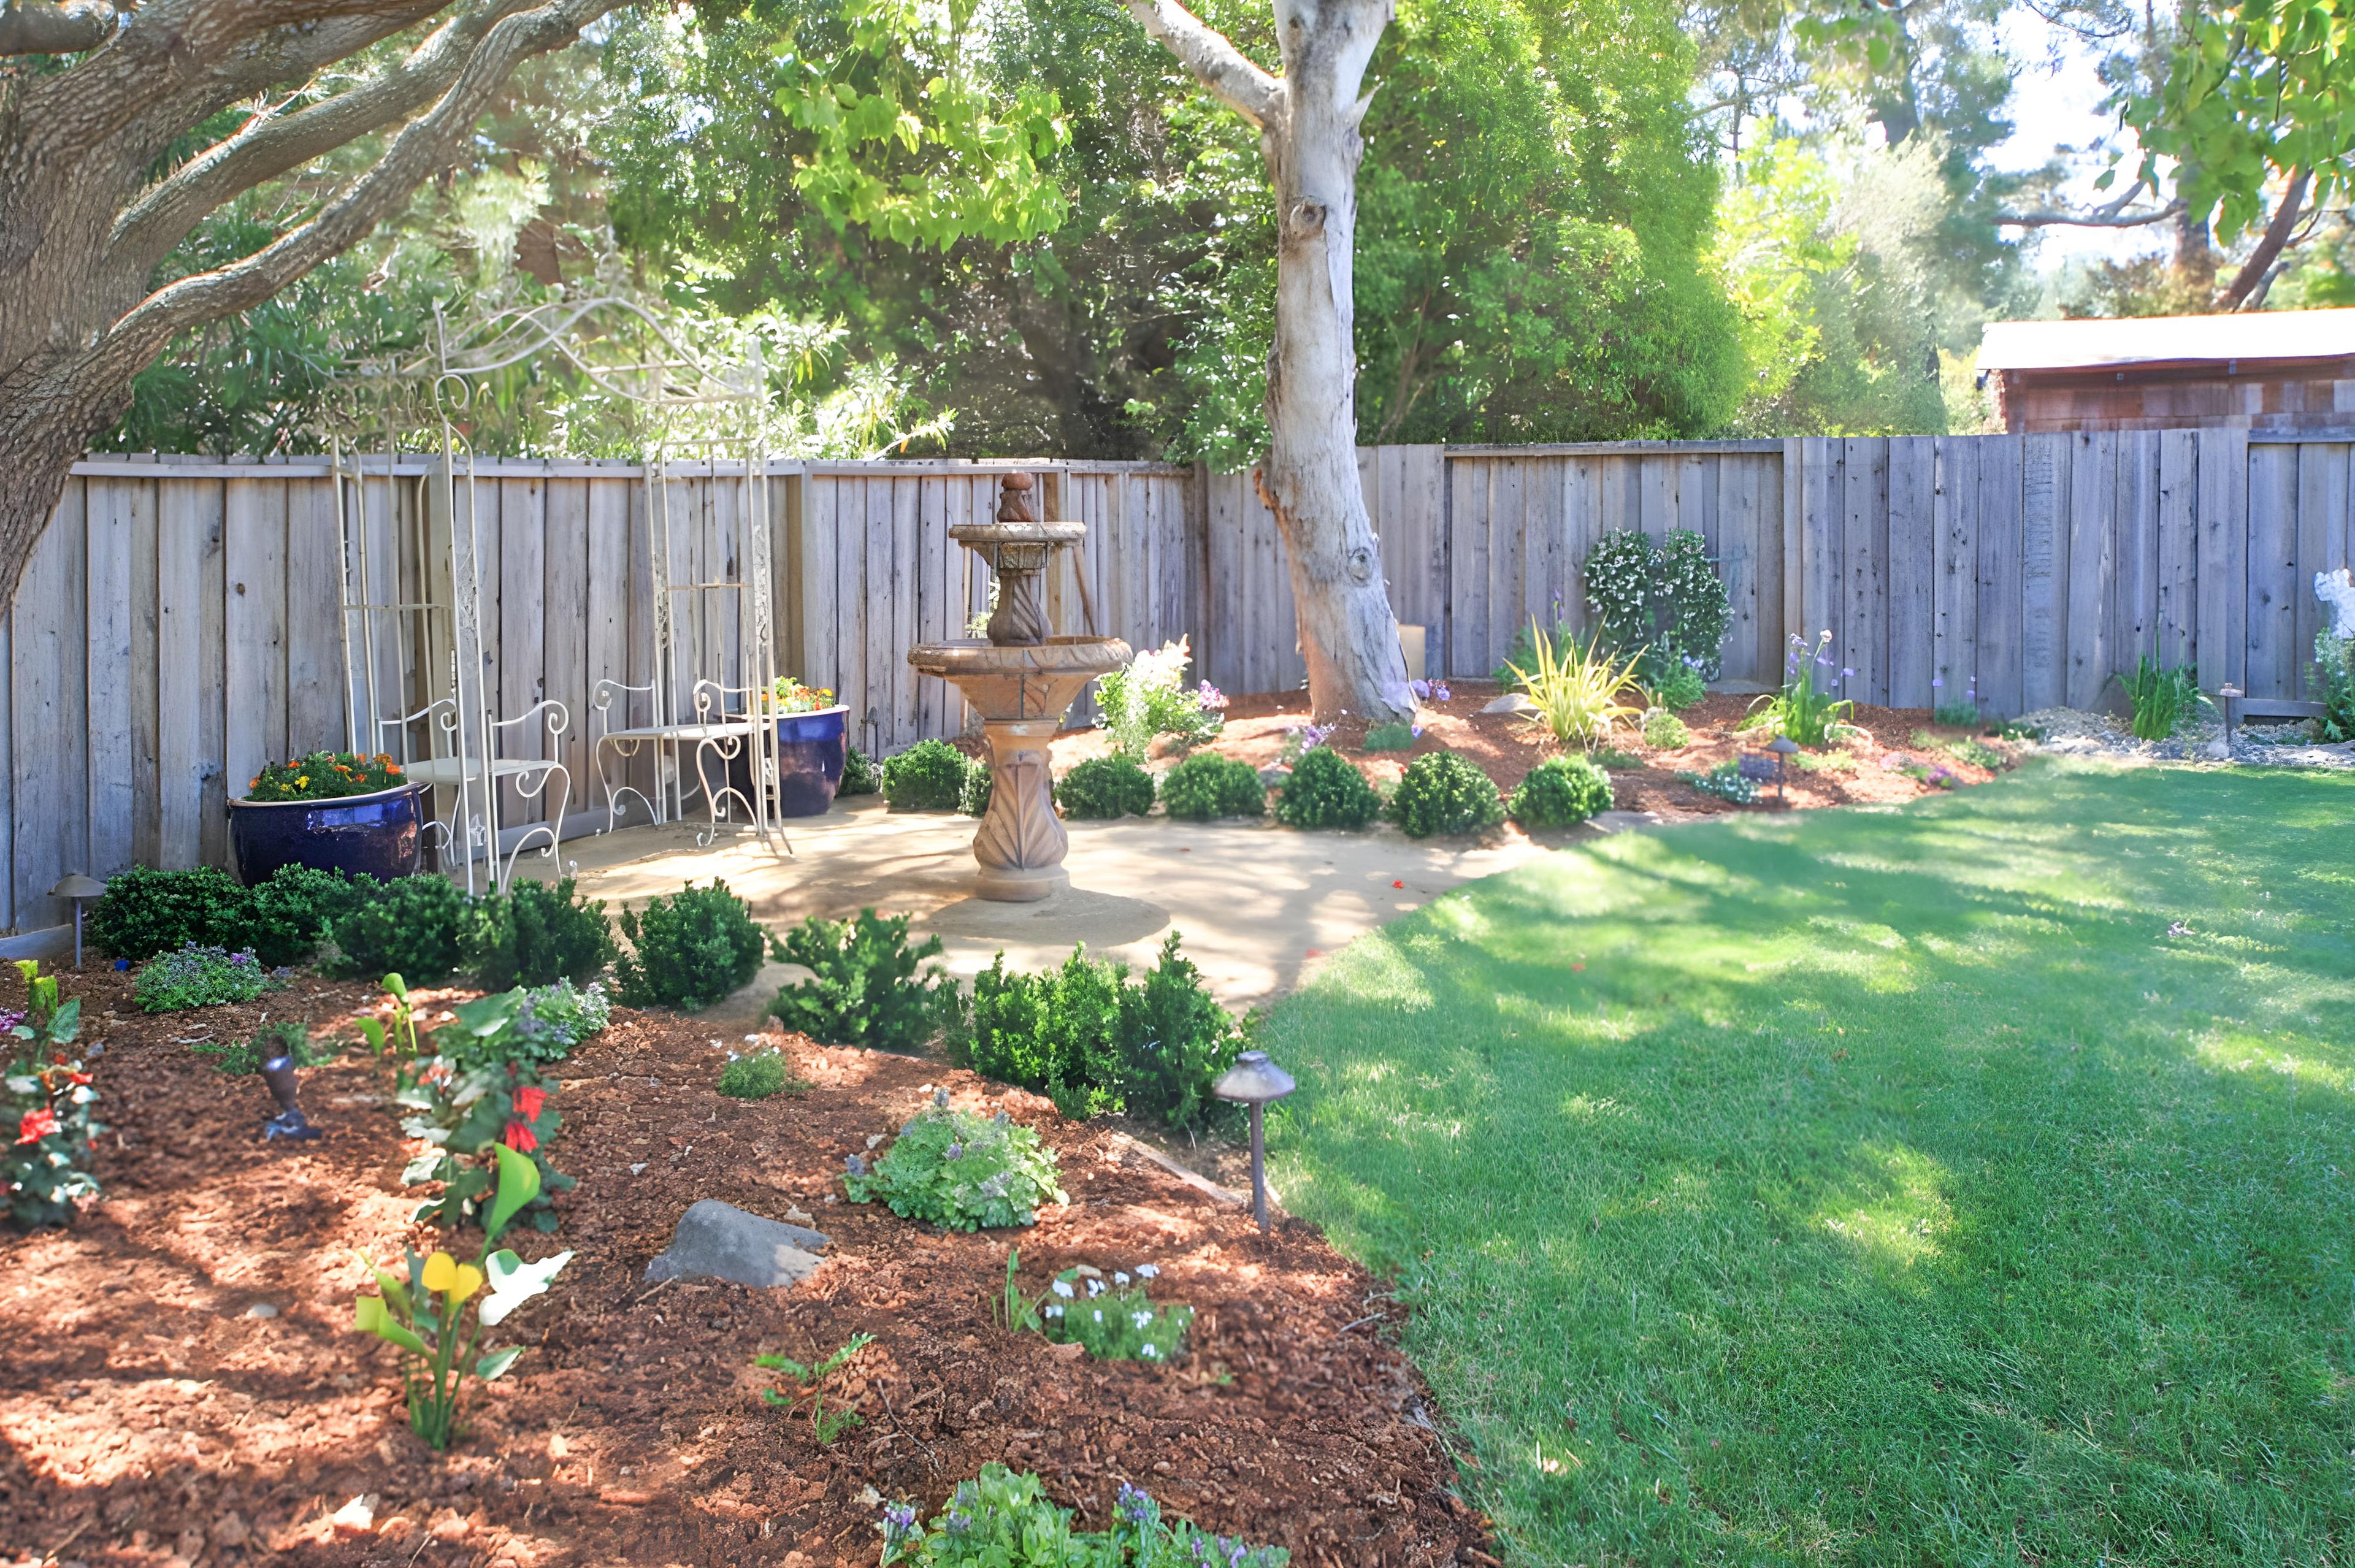 Picture of Sampson's Landscaping, Inc. - Sampson's Landscaping, Inc.